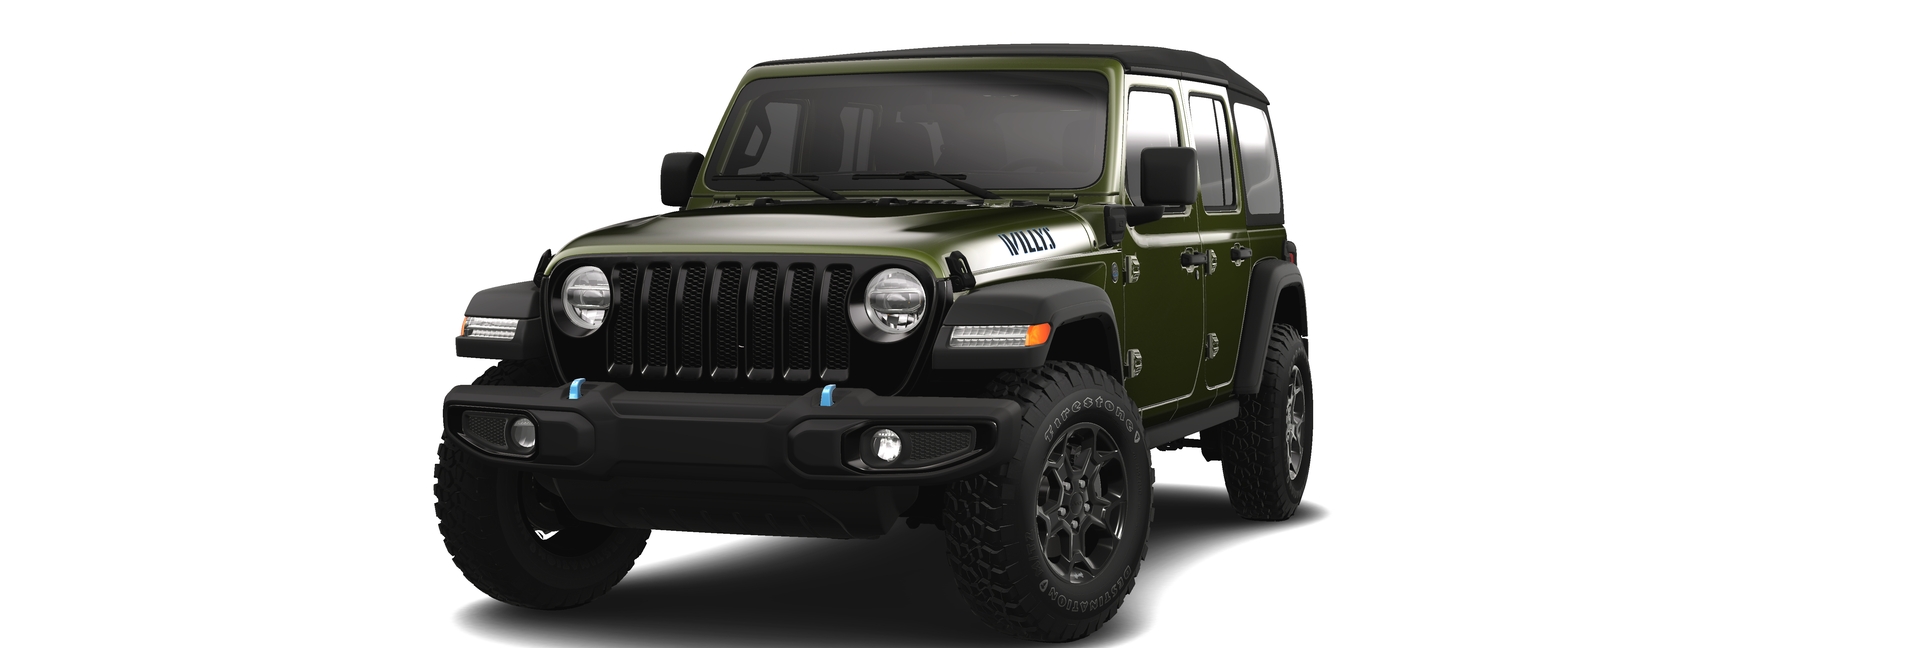 Jeep Build and Price | Jeep Canada